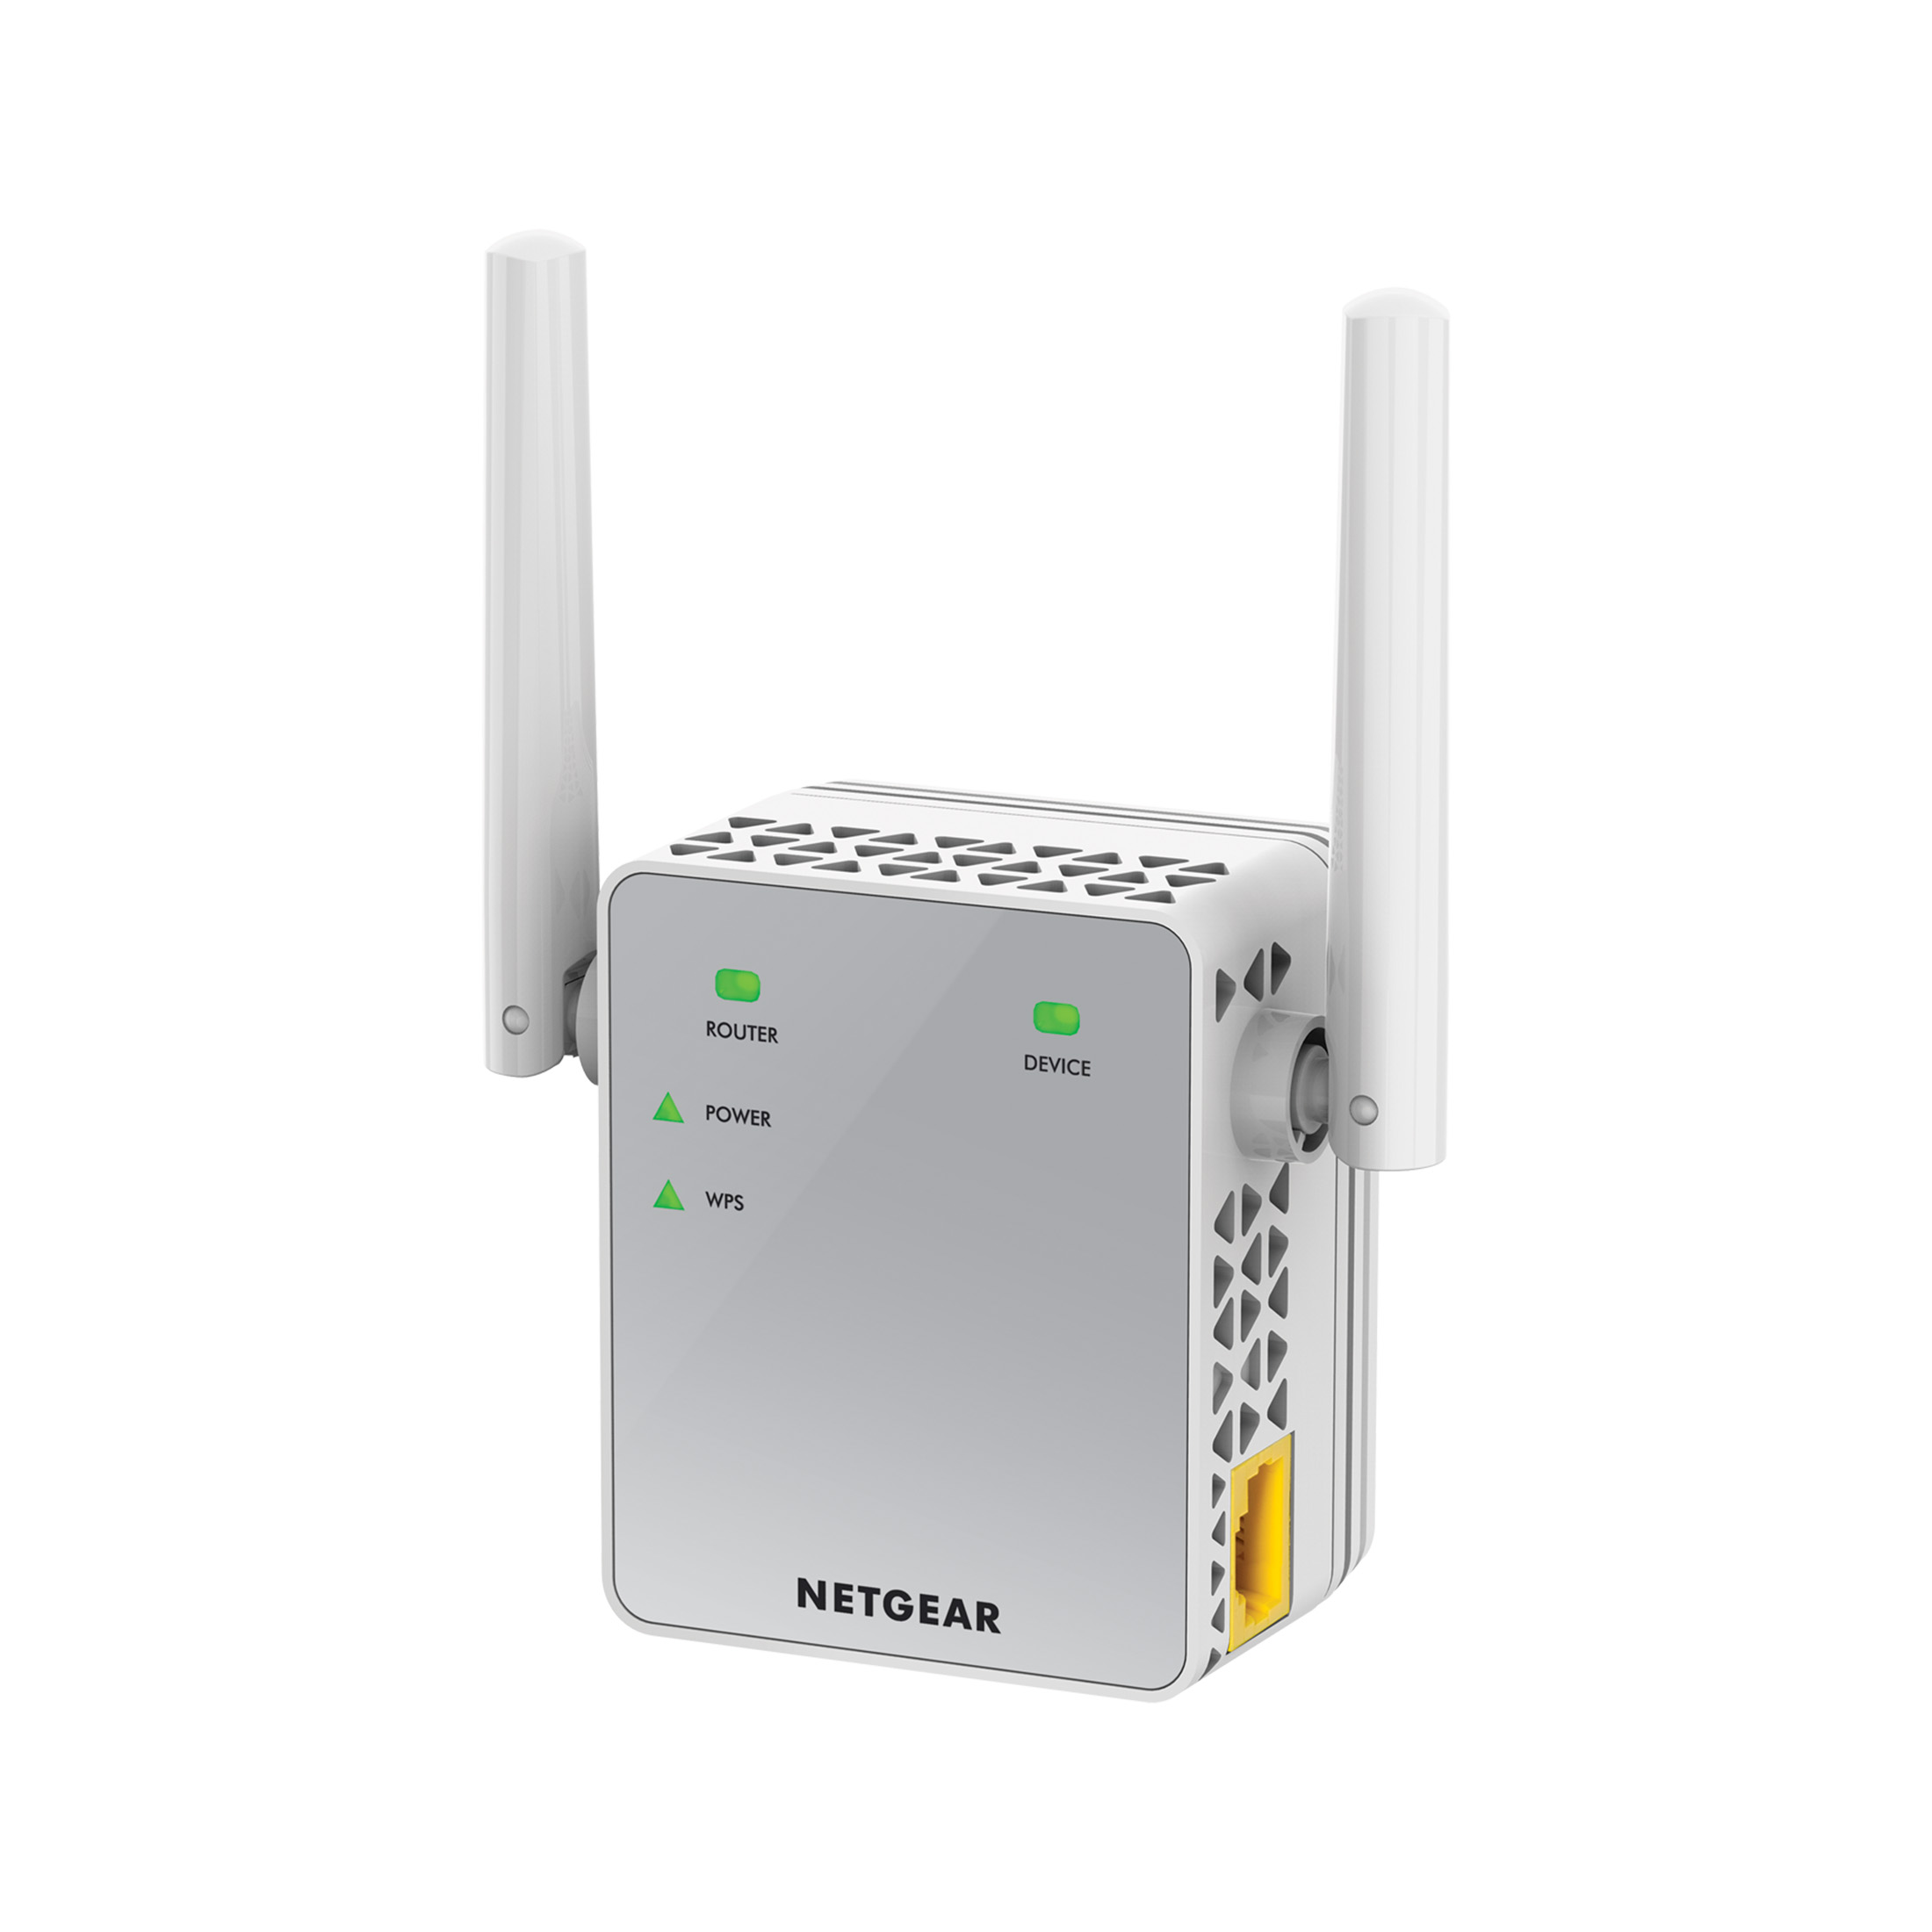 NETGEAR - AC750 WiFi Range Extender and Signal Booster, Wall-Plug, 750Mbps (EX3700) - image 1 of 7